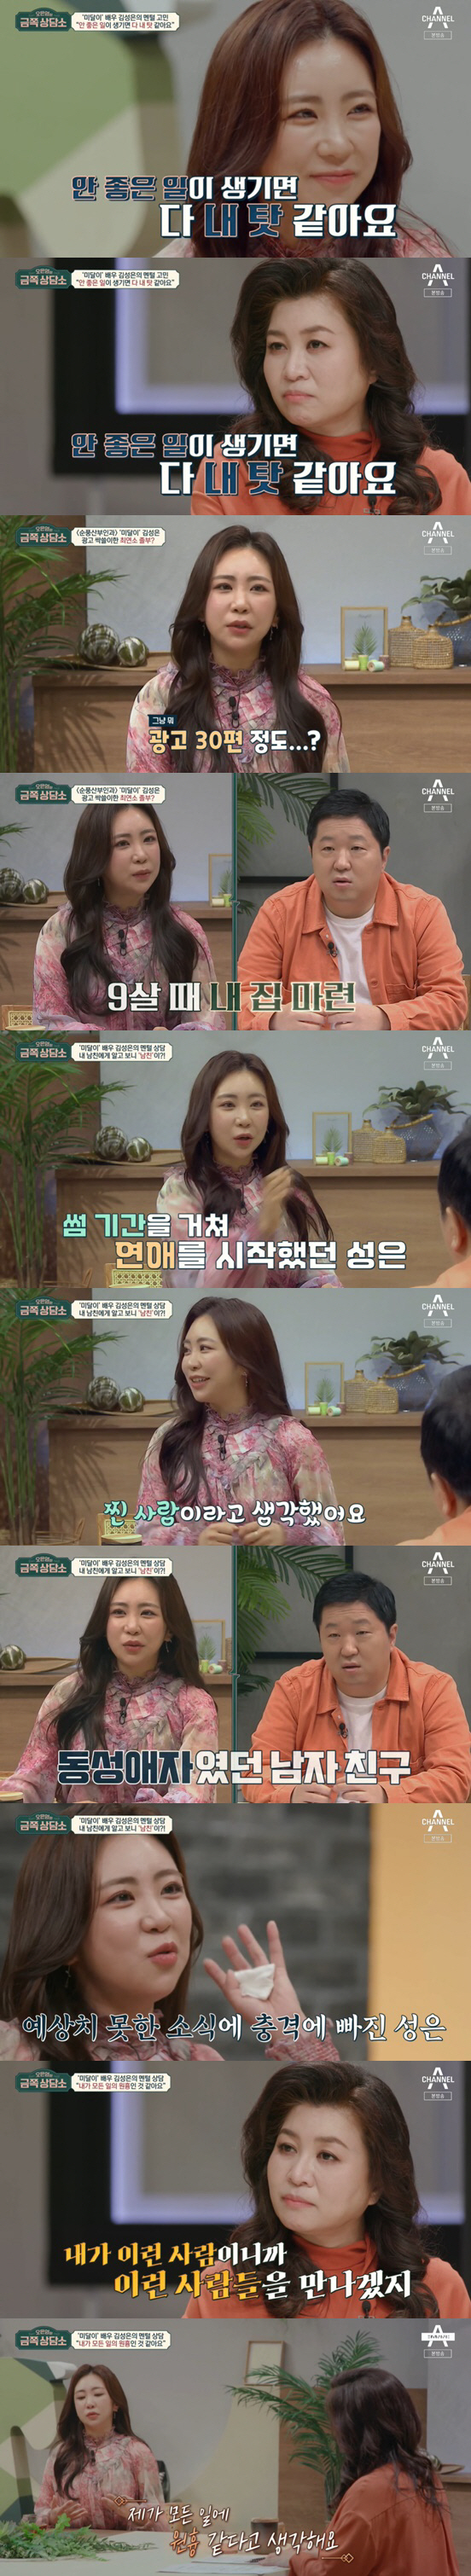 Oh Eun-youngs Gold Counseling Center Kim Sung-eun showed tears as he recalled his difficult childhood actor days.On the 15th channel A Oh Eun-youngs Gold Counseling Center, Actor Kim Sung-eun was shown to be worried.The first customer was Actor Kim Sung-eun, who perfected the role of underachievement in the sitcom Sunpoong Obstetrics and Gynecology.Asked about the current situation, Kim Sung-eun said, I played theater, musical, and went back to school last year.Kim Sung-eun, who had gained a sensational popularity with his role of underdog at the time, was surprised to find that he had shot about 30 commercials, and also set up my house at the age of nine.Kim Sung-eun, who had been able to enjoy such popularity and bright, surprised Oh Eun Young Doctorate and MC by saying, If something bad happens, it is my fault.Kim Sung-eun said: I am extremely scared of the uncomfortable situation. When an uncomfortable atmosphere is created, I notice a lot.When my acquaintance becomes difficult with personal affairs, I feel like my bad energy has influenced me. He also continued to be somewhat surprised and heartbreaking Confessions that he was a homosexual because he knew the identity of the opponent who had a serious meeting because of his failure to expand his business.Kim Sung-eun said, I had a boyfriend who had a serious meeting for six months. He really cared about me, thought it was a hot love.I was shocked, he said. I thought I was like a ghost in everything.I feel so sick and sorry, and I do not think that everything seems to be because of me. Oh Eun Young could not hide his worried expression at the end of Kim Sung-euns saying that whatever bad thing was my fault is endless.Oh Eun Young has been seriously analyzed by Kim Sung-euns story and has been in a sharp analysis. He has been in a fool syndrome that blames me for everything when I am in a bad situation.Oh Eun Young said: Mr. Sung seems to think that in a meaningful relationship I should handle this situation.So if things get worse, I think its all my fault. Im overreflectioned. Kim Sung-eun said, I can not fully receive peoples praise.I do not think I can do it, but I think its raining. He asked, Do you not trust your ability? Oh Eun Young was heartbroken by Kim Sung-euns unexpected Confessions, which was called genius child actor for his outstanding acting skills.Kim Sung-eun called the young Kim Sung-eun an unstable, busy, well-to-do, lonely child.When I thought of underachievement, I answered, I am the only one who comes up with tiredness. Oh Eun Young said, I still can not distinguish between underachievement and human Kim Sung-eun.If it is not distinguishable, it seems too difficult. In Oh Eun Youngs keen analysis, Kim Sung-eun was surprised to say, Its like a thriller movie. Before the underdog role, he was a really introverted child.I had to memorize the script within hours, and I had to sleep in the waiting room and shoot hard in the waiting room.I was a lot of trouble, he explained, explaining the life of an actor when it was difficult for a child to handle.Oh Eun Young comforted him, I think it would have been difficult to build up myself because of the memories of my childhood that was shrinking. Kim Sung-eun said, I almost gave up my role because it was so hard.Kim Sung-eun also said, I think I have been buried for too long because my tendency and personality have been learned.I could not separate myself from the underdog. And when my father died and I did an autopsy, my father called me last.I could not forgive myself for not receiving my fathers last call. It was a lot hard after my father died. Oh Eun Young advised him to say goodbye to the underdog, saying, Specify the underdog and Kim Sung-eun.Kim Sung-eun, who met a underachiever who lived 25 years ago, said, I have been suffering so much, and there are so many good things I got thanks to you.I will not forget that gratitude as long as I am alive, but I will say goodbye here because I have to live my life as me.Ive been so grateful for it, he said, adding that he was obnoxious.